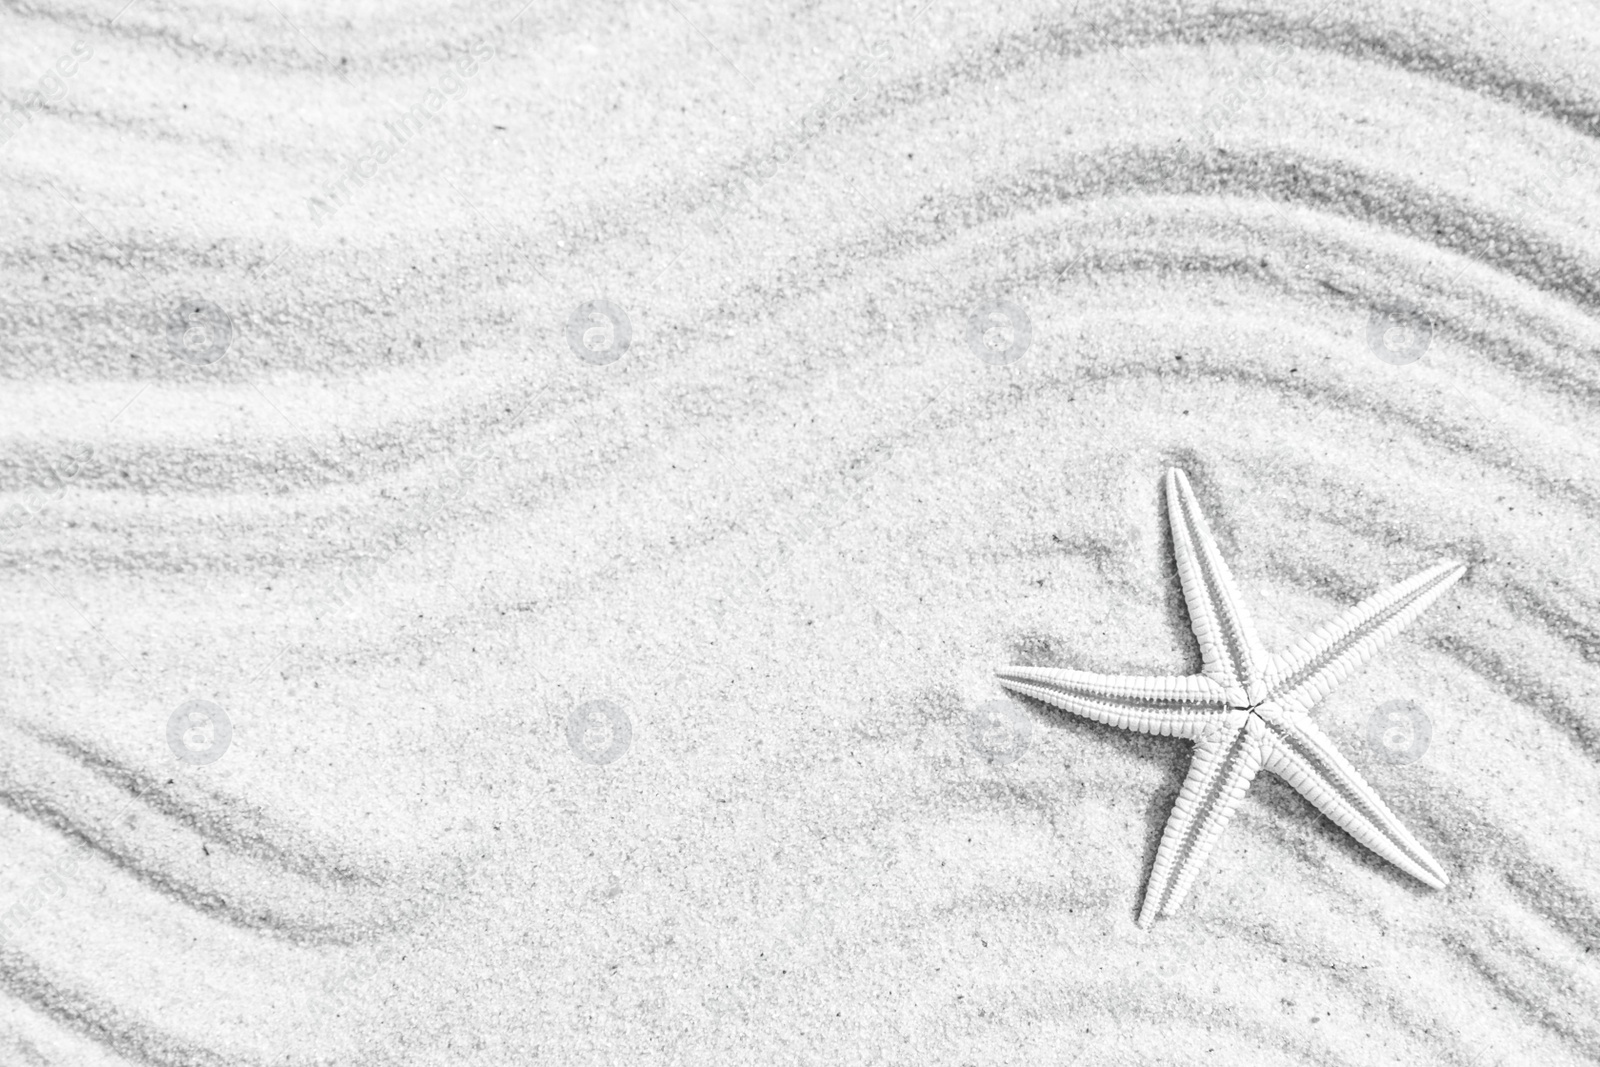 Image of Starfish on beach sand with wave pattern, top view. Space for text